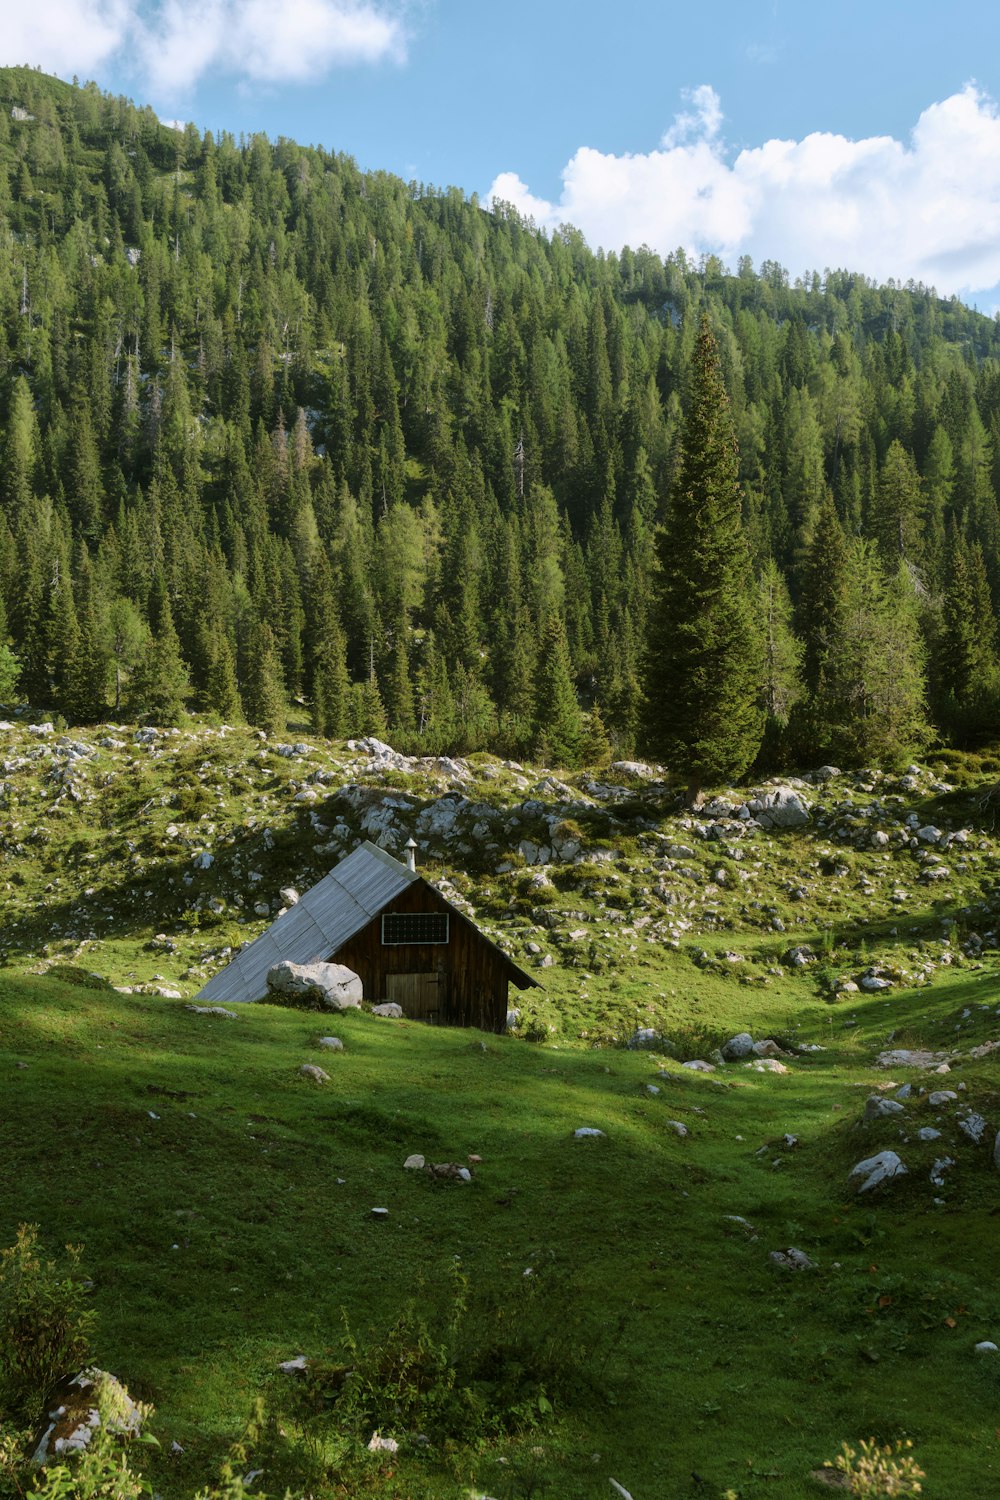 a small cabin in the middle of a grassy field